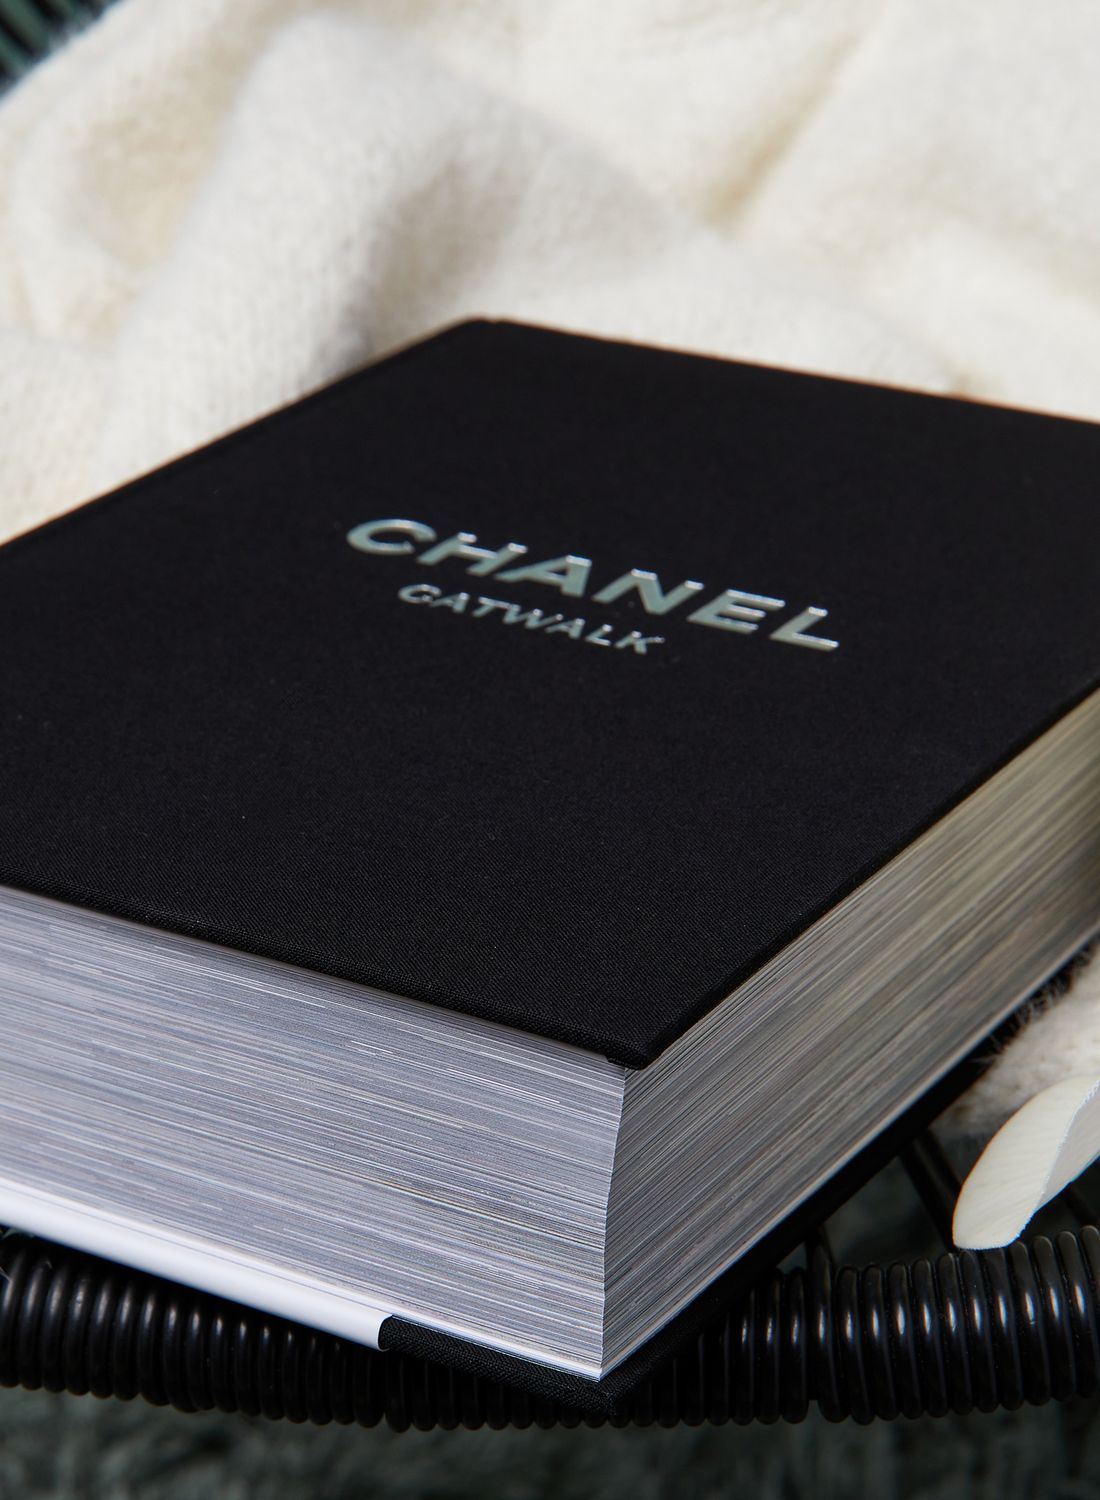 Chanel Catwalk: The Complete Collections